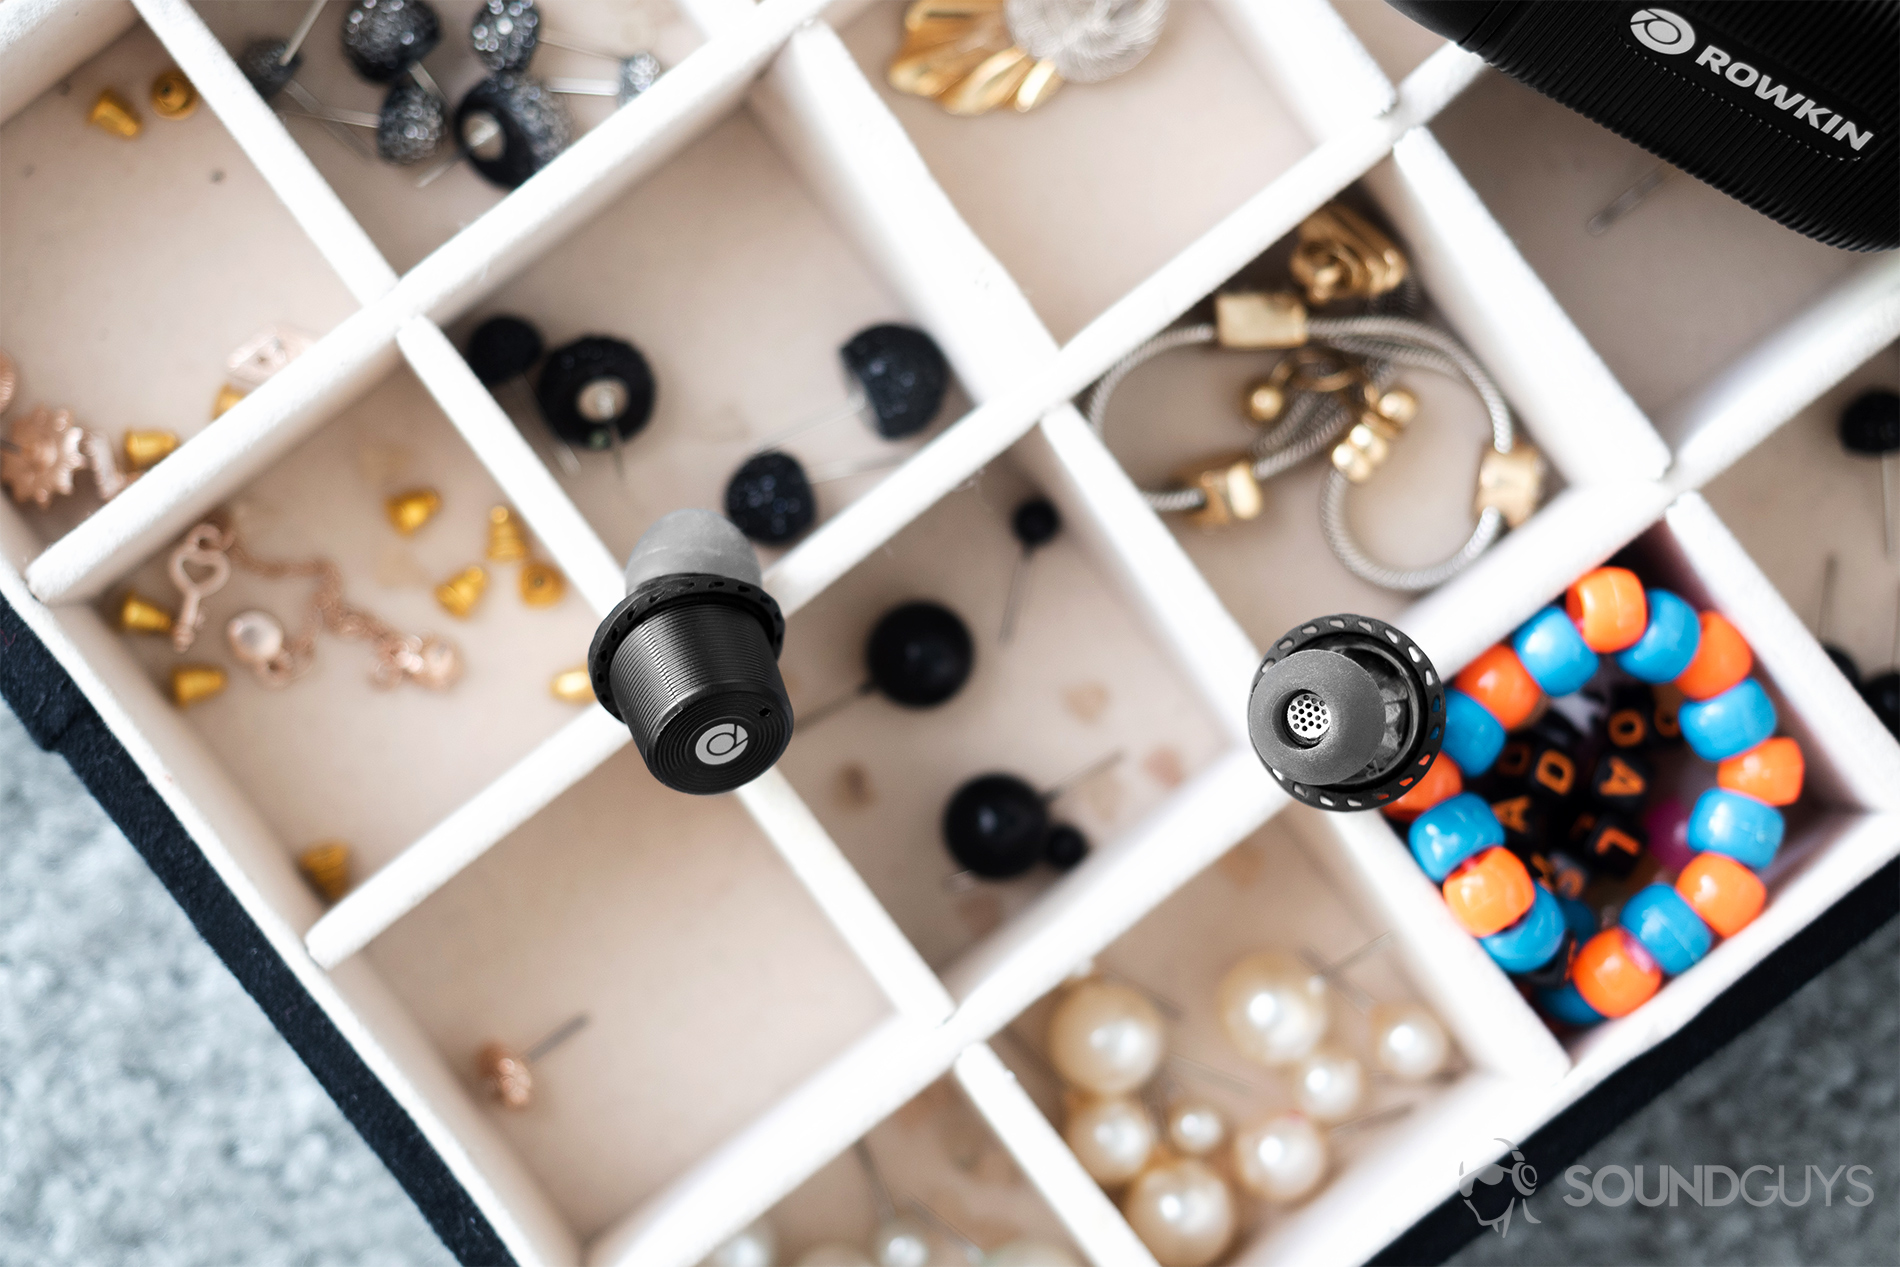 Rowkin Ascent Micro: A top-down image of the earbuds on top of an open jewelery case.